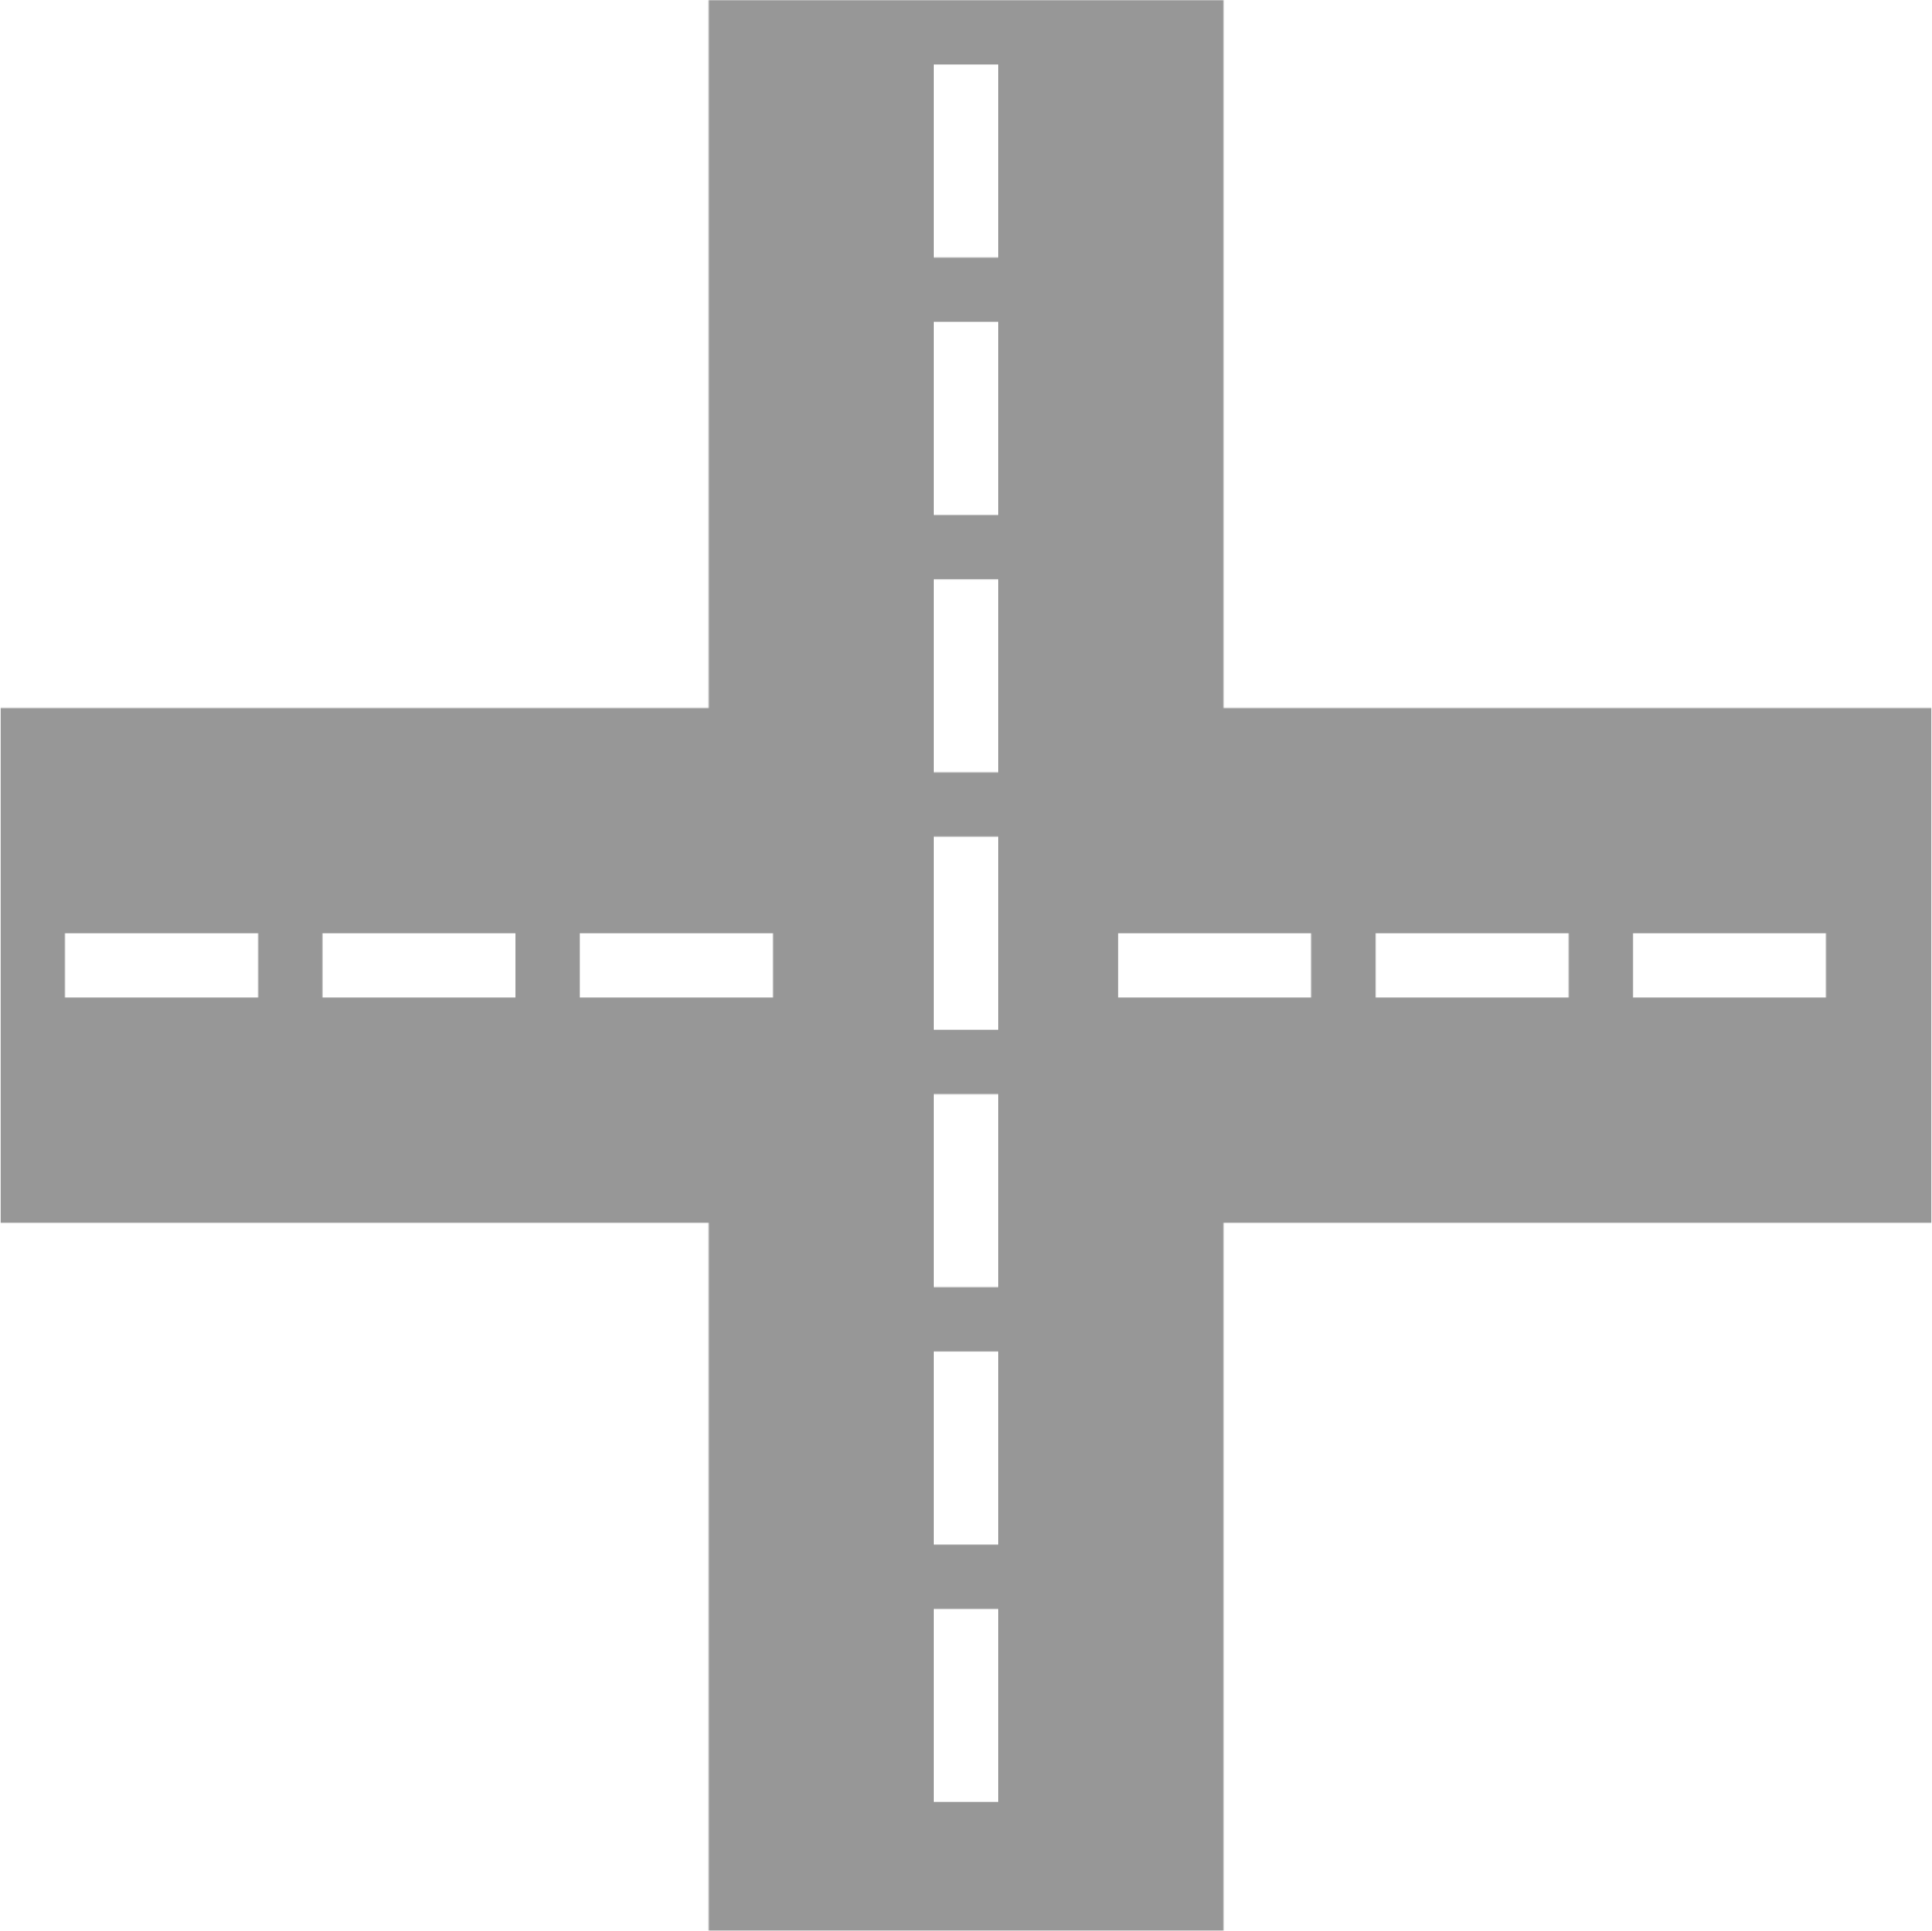 cross intersection icon